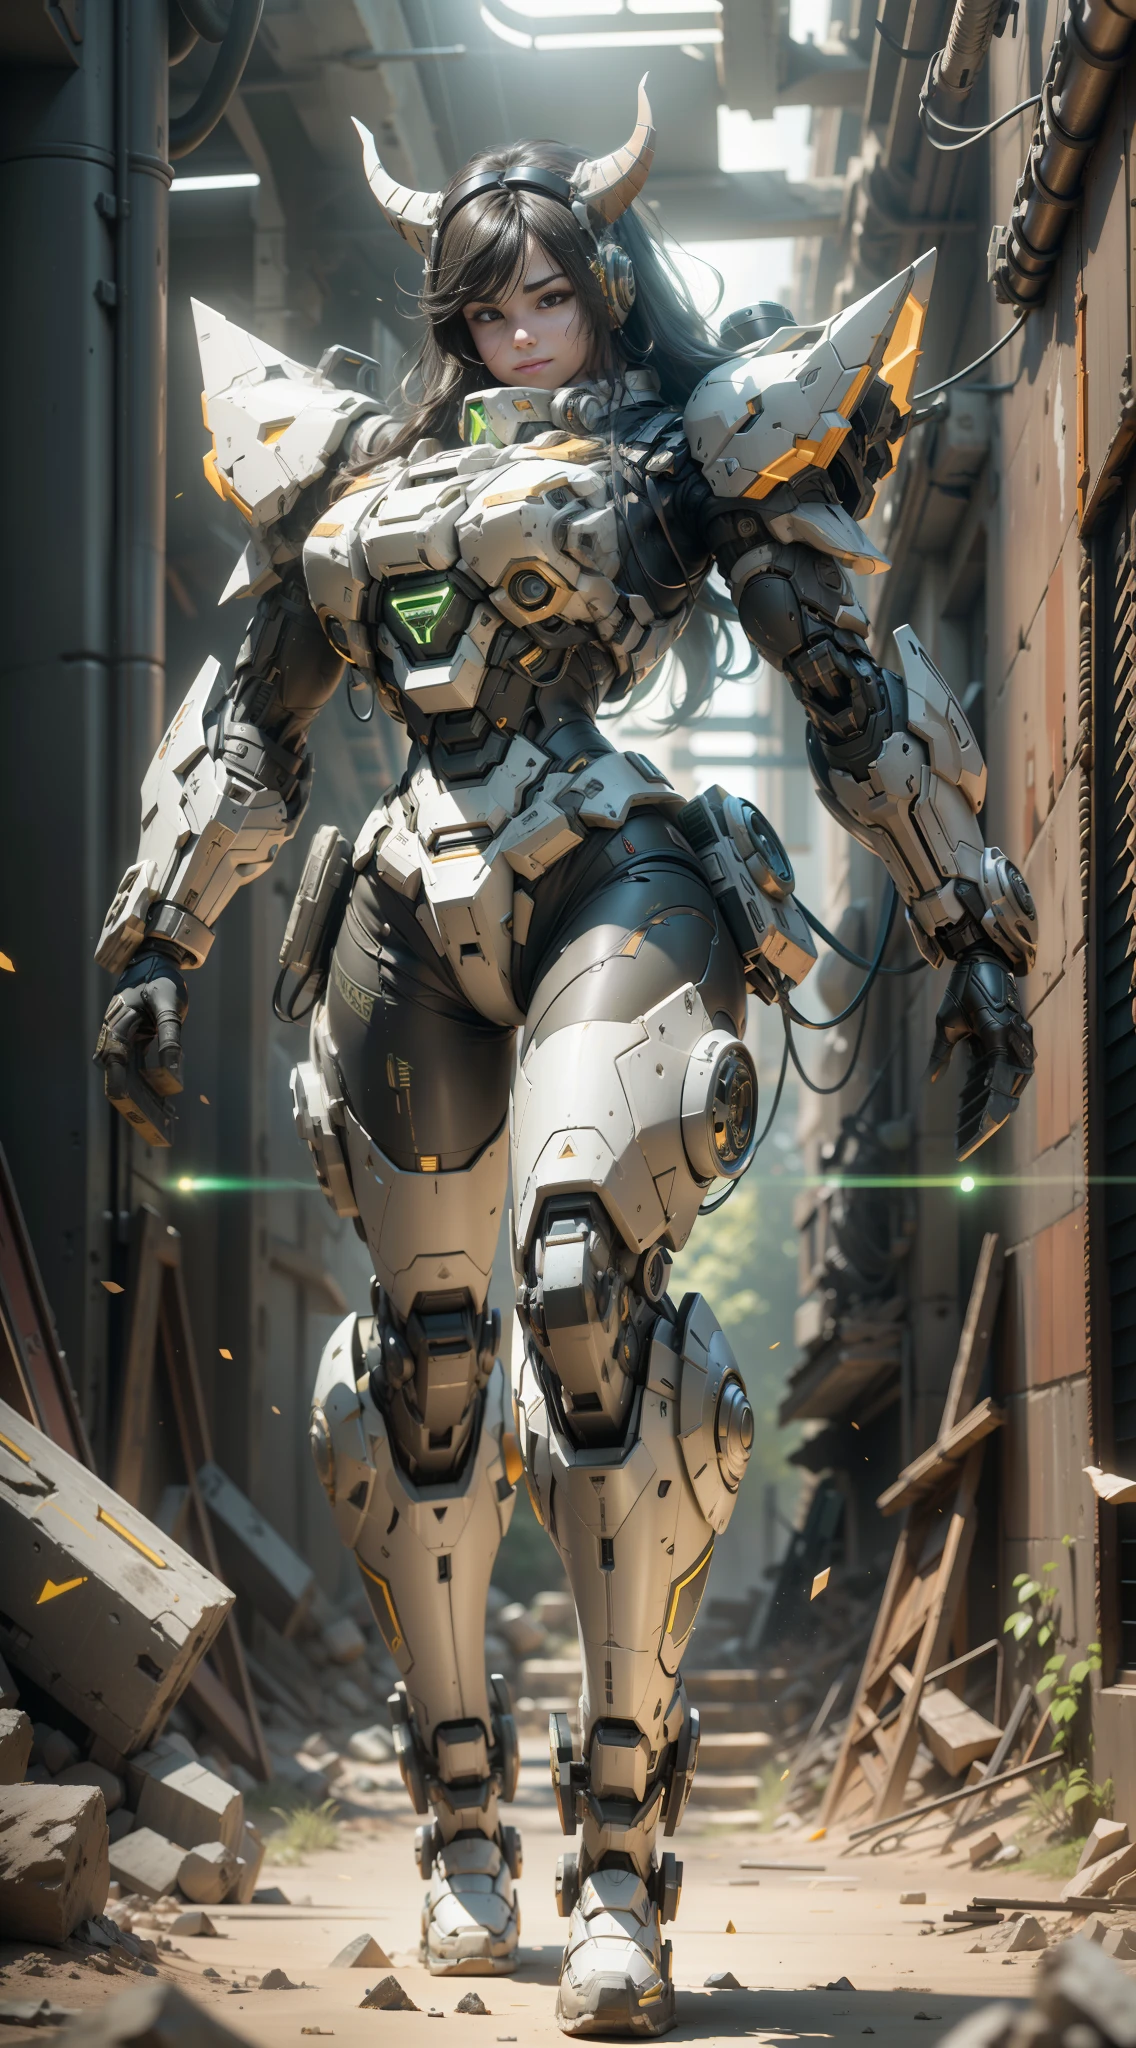 ((Best Quality)), ((Masterpiece)), (Very detailed: 1.3), 3D, Shitu-mecha, Full body, 1 beautiful woman, smiling, long hair, wearing a mech in black color scheme with horns on the head, ((strong)), (mech with cowhide decoration), ruins of a city in the forgotten war, ancient technology, HDR (High Dynamic Range), ray tracing, NVIDIA RTX, super resolution, Unreal 5, subsurface scattering, PBR texture, post-processing, Anisotropic Filtering, Depth of Field, Maximum Sharpness and Acutance, Multi-layer Textures, Albedo and Highlight Maps, Surface Shading, Accurate Simulation of Light-Material Interactions, Perfect Proportions, Octane Rendering, Duotone Illumination, Low ISO, White Balance, Rule of Thirds, Wide Aperture, 8K RAW, High Efficiency Subpixels, Subpixel Convolution, Luminescent Particles, Light Scattering, Tyndall Effect